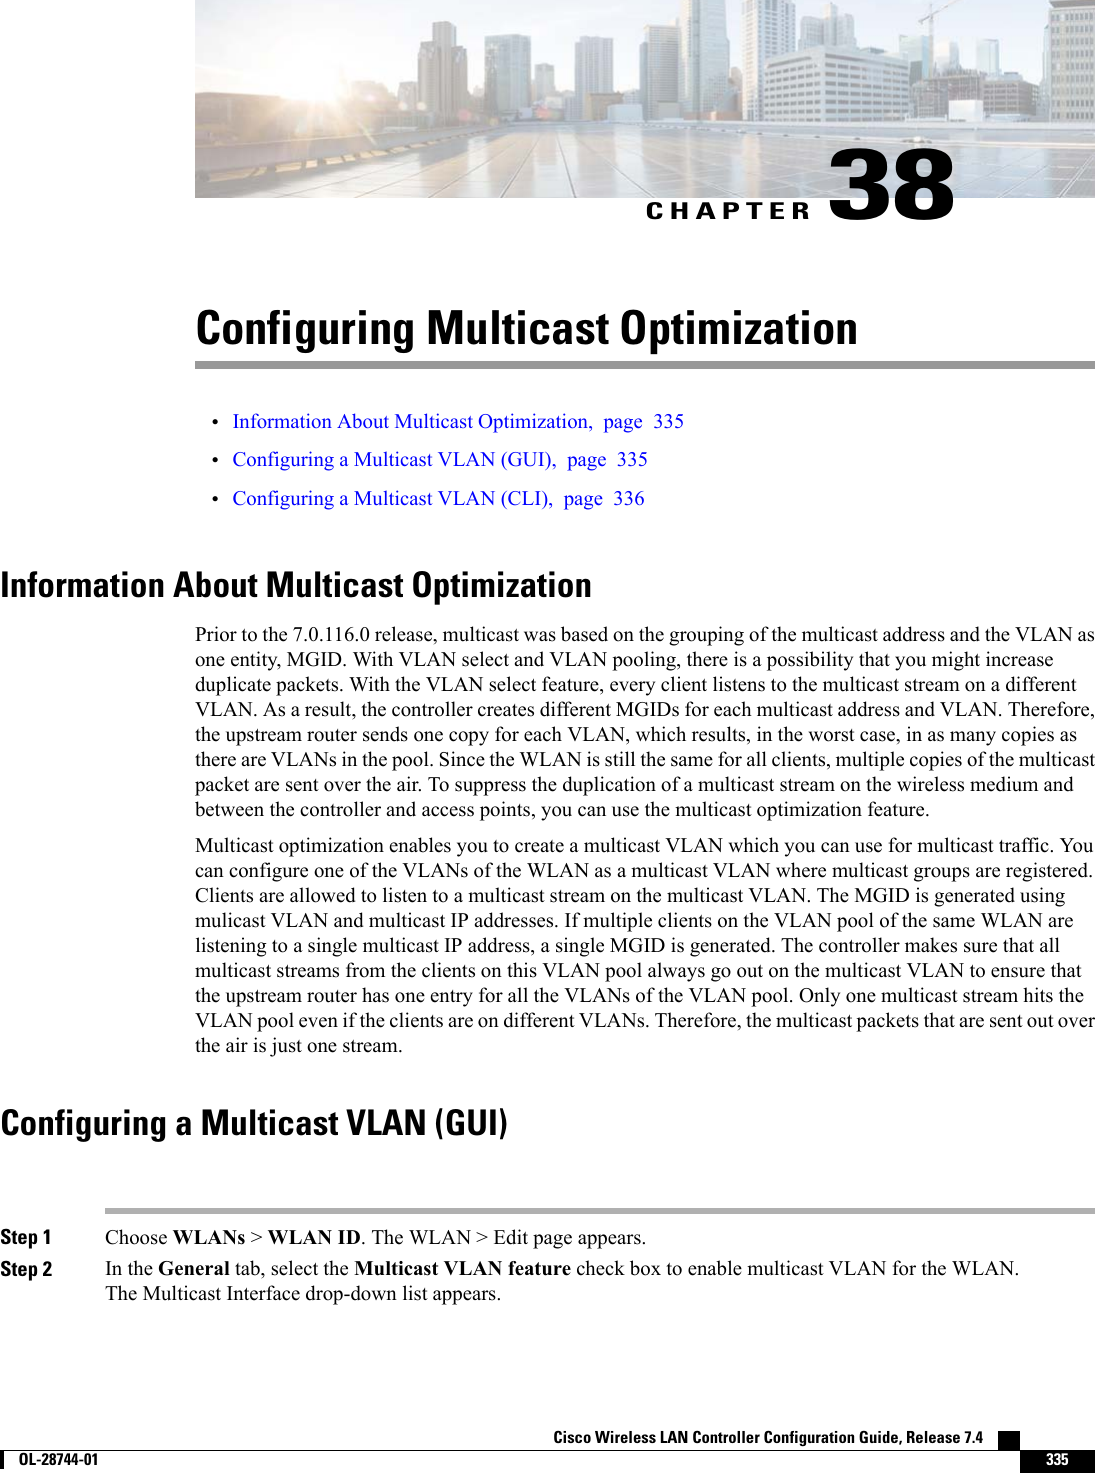 CHAPTER 38Configuring Multicast Optimization•Information About Multicast Optimization, page 335•Configuring a Multicast VLAN (GUI), page 335•Configuring a Multicast VLAN (CLI), page 336Information About Multicast OptimizationPrior to the 7.0.116.0 release, multicast was based on the grouping of the multicast address and the VLAN asone entity, MGID. With VLAN select and VLAN pooling, there is a possibility that you might increaseduplicate packets. With the VLAN select feature, every client listens to the multicast stream on a differentVLAN. As a result, the controller creates different MGIDs for each multicast address and VLAN. Therefore,the upstream router sends one copy for each VLAN, which results, in the worst case, in as many copies asthere are VLANs in the pool. Since the WLAN is still the same for all clients, multiple copies of the multicastpacket are sent over the air. To suppress the duplication of a multicast stream on the wireless medium andbetween the controller and access points, you can use the multicast optimization feature.Multicast optimization enables you to create a multicast VLAN which you can use for multicast traffic. Youcan configure one of the VLANs of the WLAN as a multicast VLAN where multicast groups are registered.Clients are allowed to listen to a multicast stream on the multicast VLAN. The MGID is generated usingmulicast VLAN and multicast IP addresses. If multiple clients on the VLAN pool of the same WLAN arelistening to a single multicast IP address, a single MGID is generated. The controller makes sure that allmulticast streams from the clients on this VLAN pool always go out on the multicast VLAN to ensure thatthe upstream router has one entry for all the VLANs of the VLAN pool. Only one multicast stream hits theVLAN pool even if the clients are on different VLANs. Therefore, the multicast packets that are sent out overthe air is just one stream.Configuring a Multicast VLAN (GUI)Step 1 Choose WLANs &gt;WLAN ID. The WLAN &gt; Edit page appears.Step 2 In the General tab, select the Multicast VLAN feature check box to enable multicast VLAN for the WLAN.The Multicast Interface drop-down list appears.Cisco Wireless LAN Controller Configuration Guide, Release 7.4        OL-28744-01 335